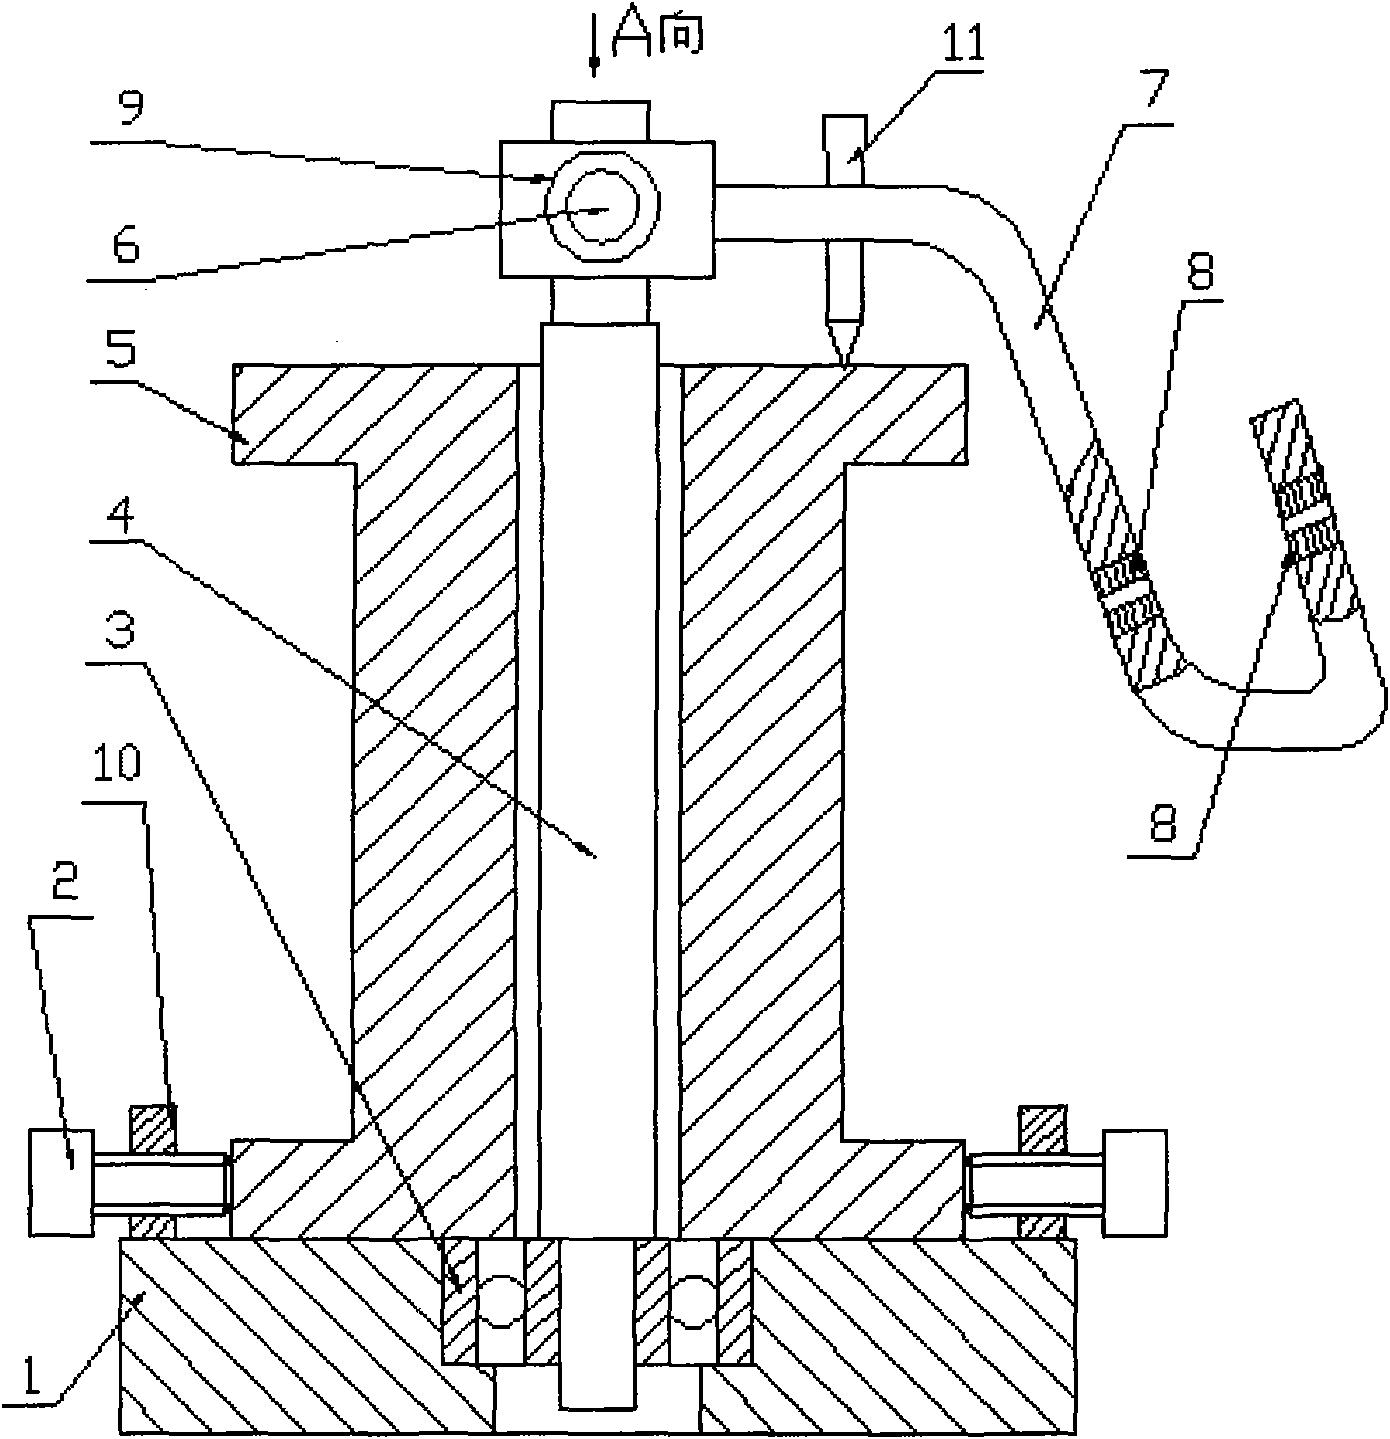 Novel pay-off frame of numerical-control winding machine